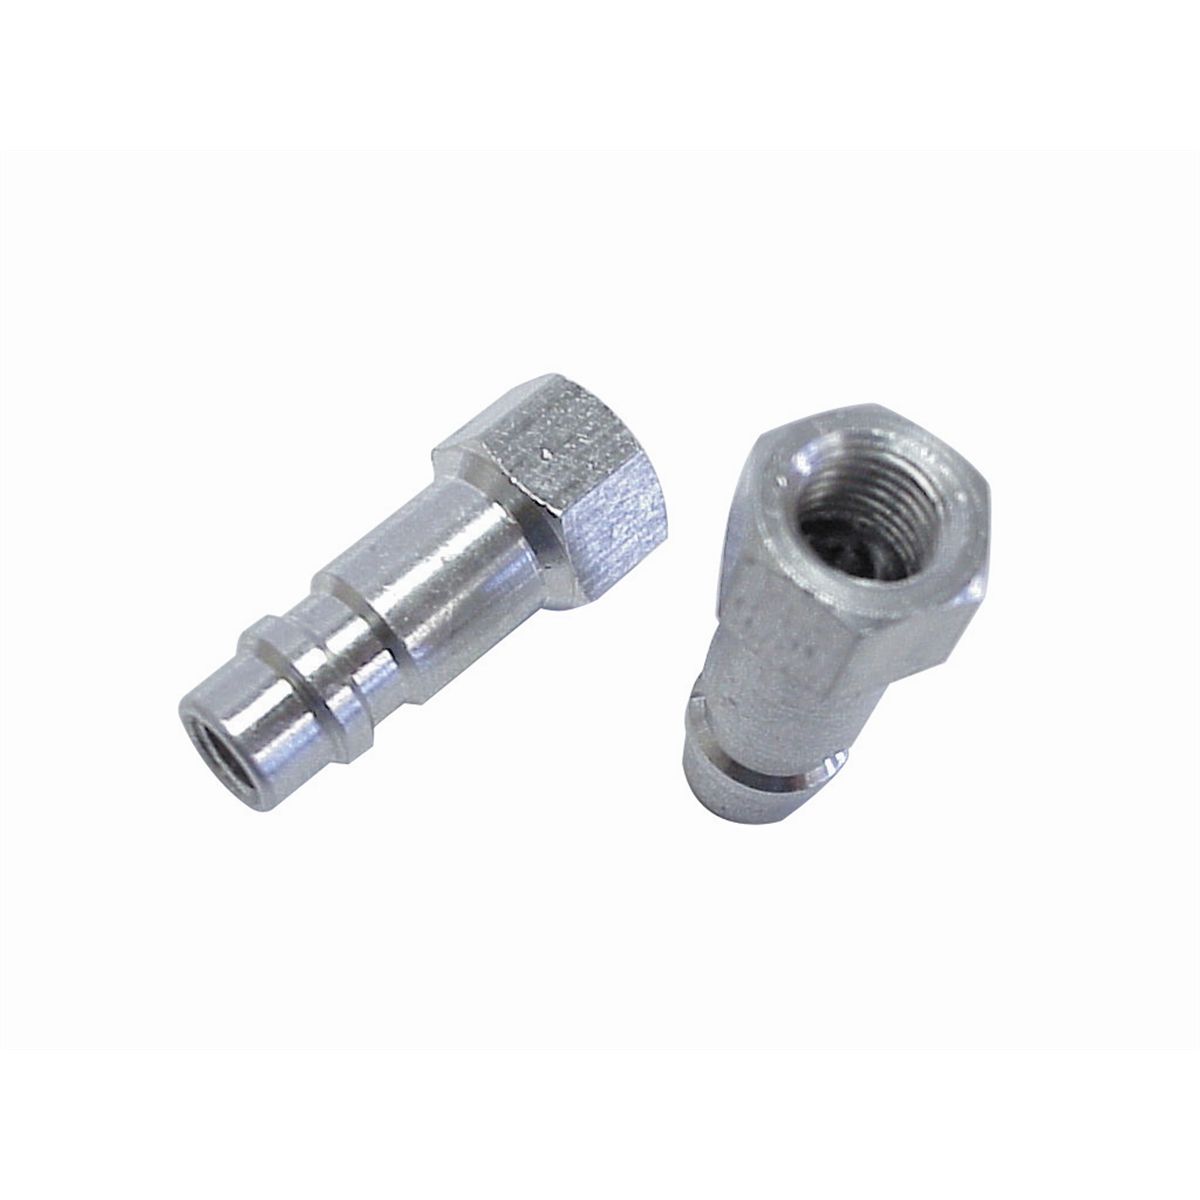 low-side-conversion-fittings-r12-r134a-5-pack-cliplight-20125